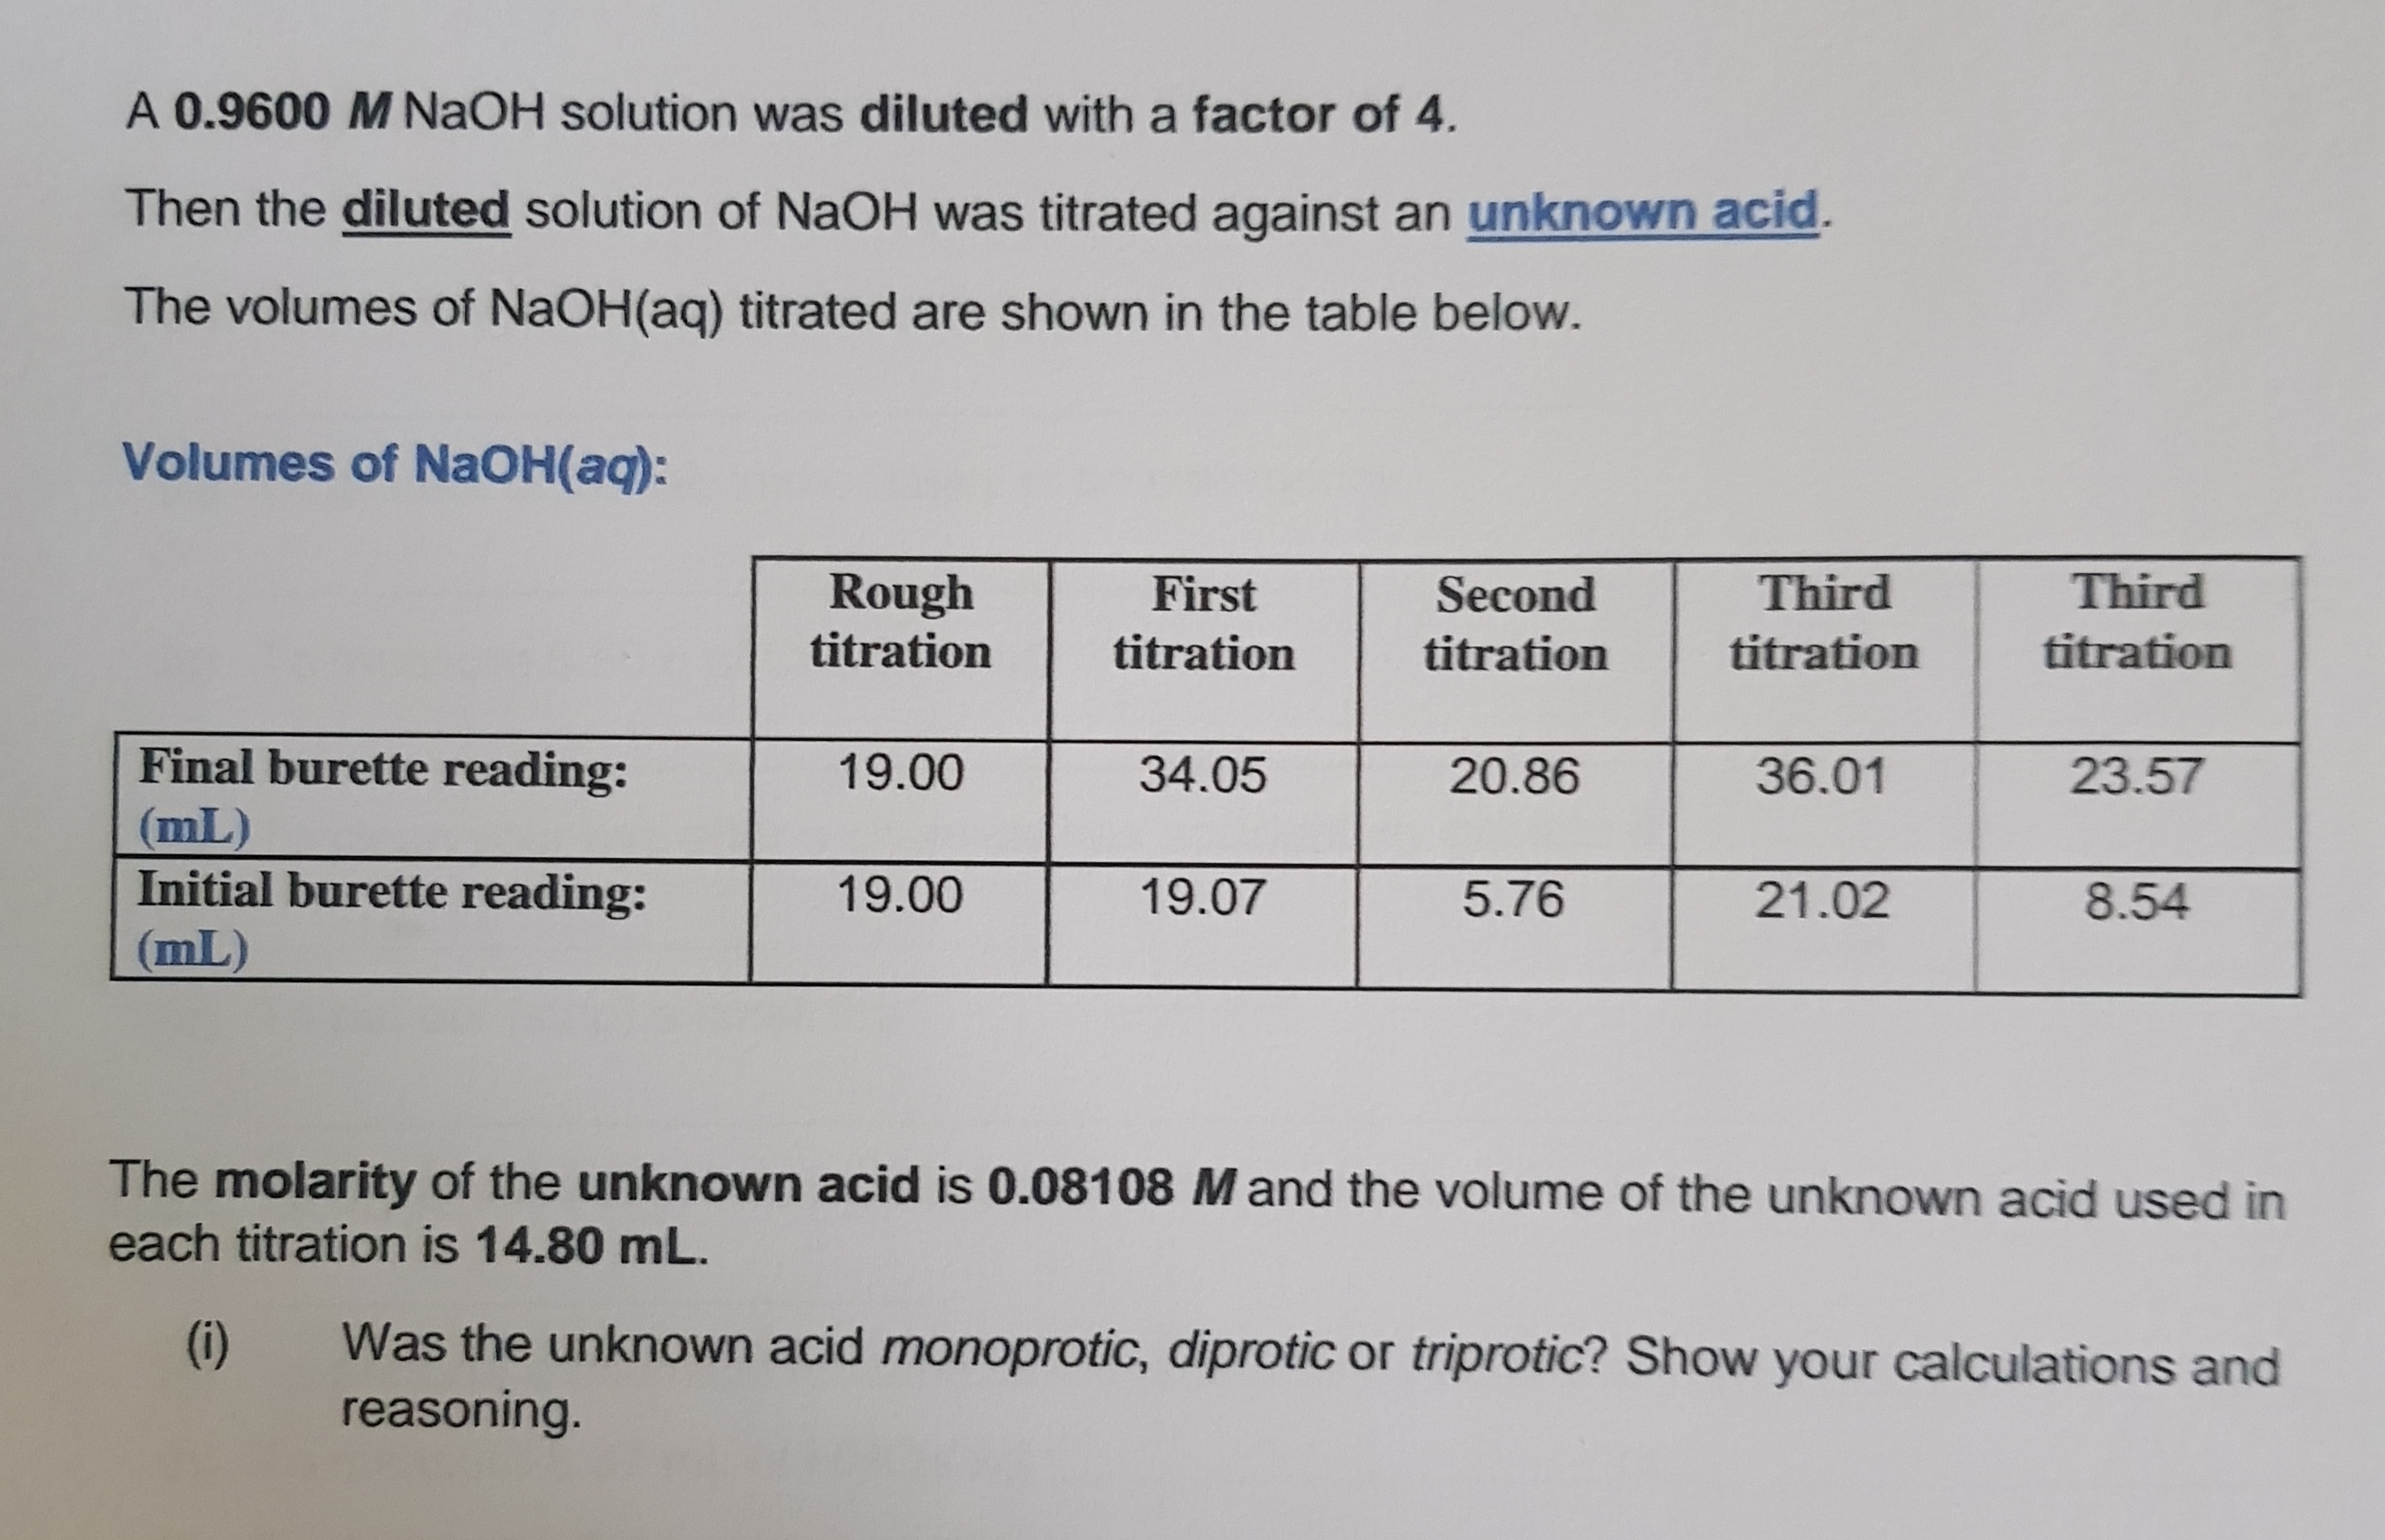 A 0.9600 M NaOH solution was diluted with a factor of 4.
Then the diluted solution of NaOH was titrated against an unknown acid.
The volumes of NaOH(aq) titrated are shown in the table below.
